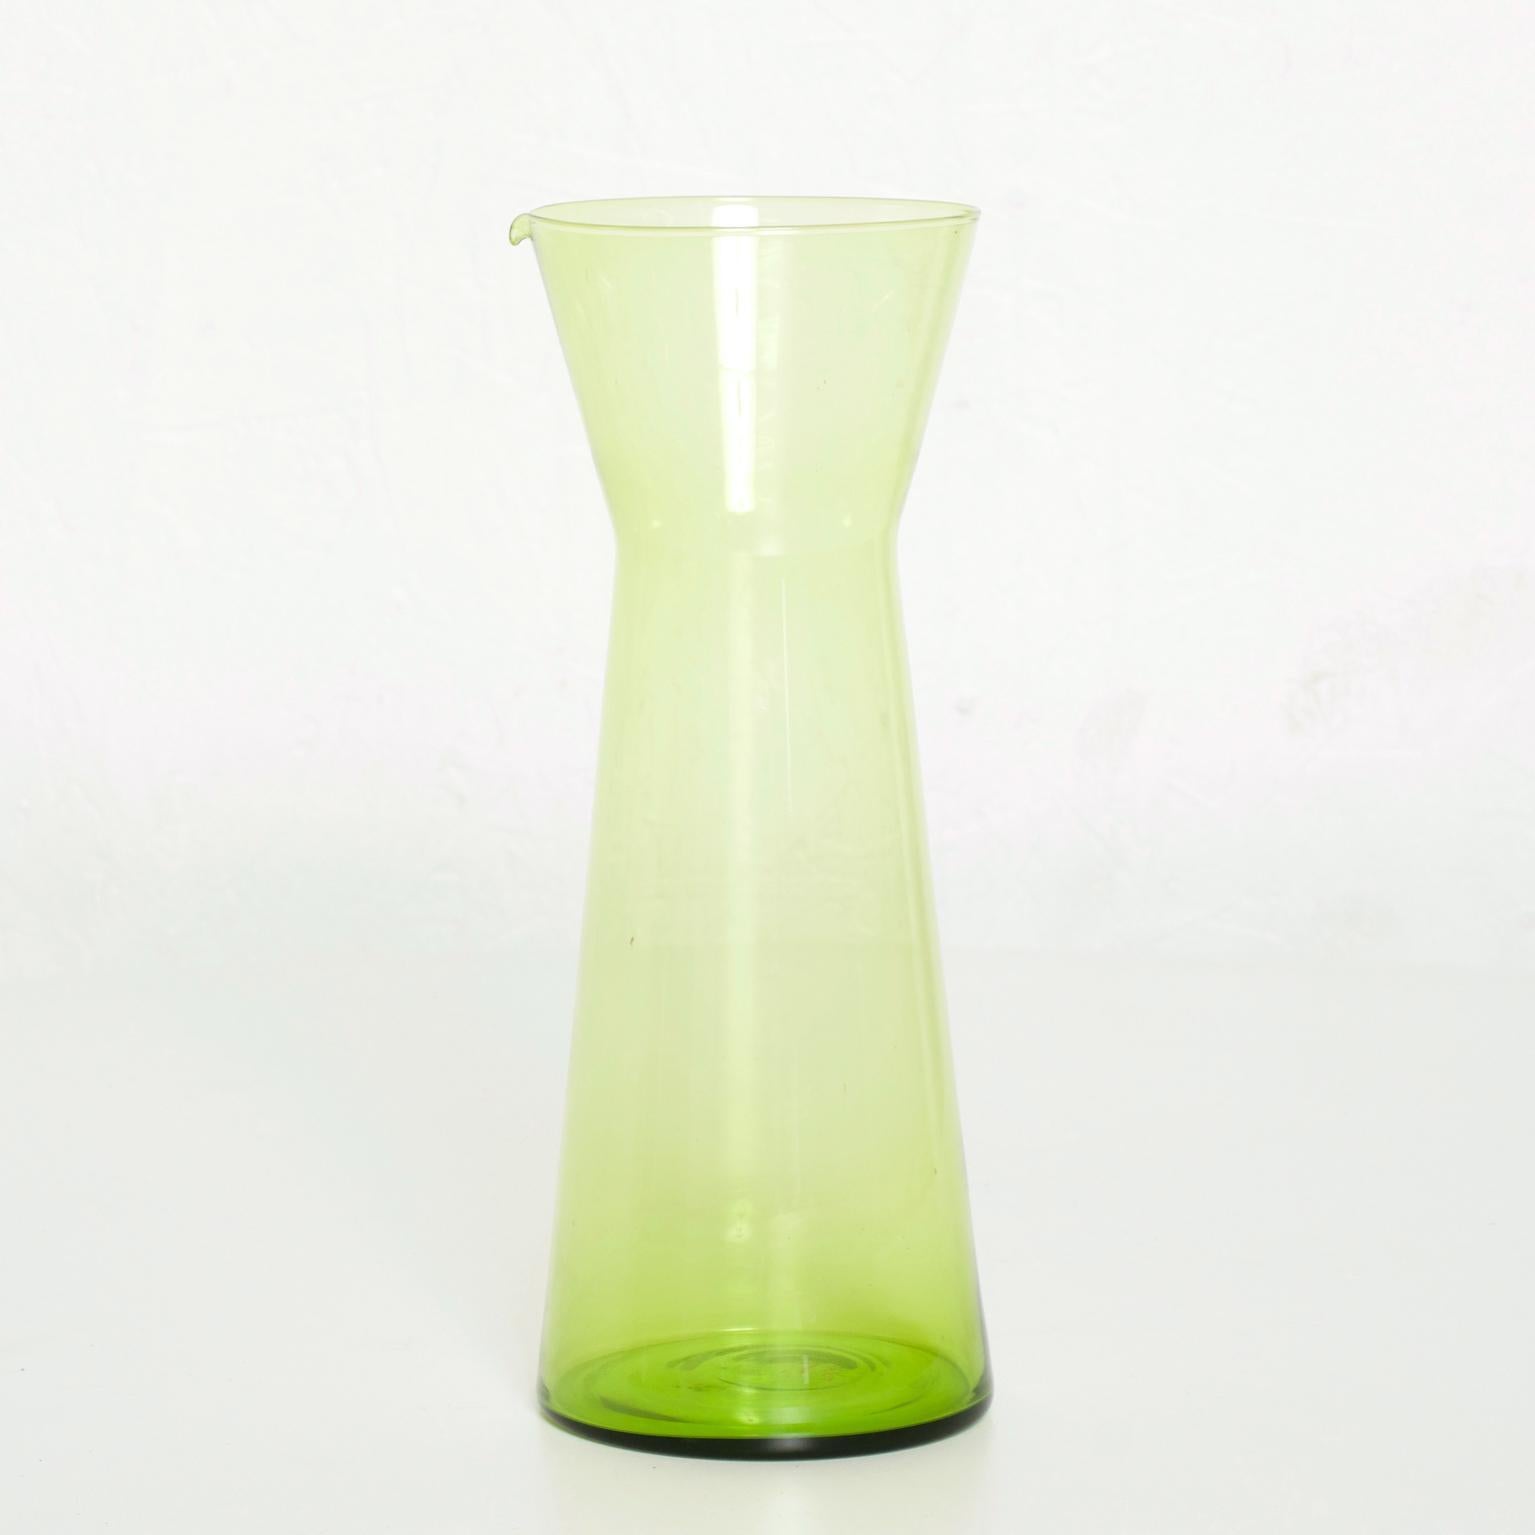 Mid Century Modern Italian Vase Pitcher in Green Glass.
REF: ACCGM1211193
Simple Clean Finnish Design Pitcher Vase designed by Kaj Franck for Iittala.
Dimensions are: 9 3/4